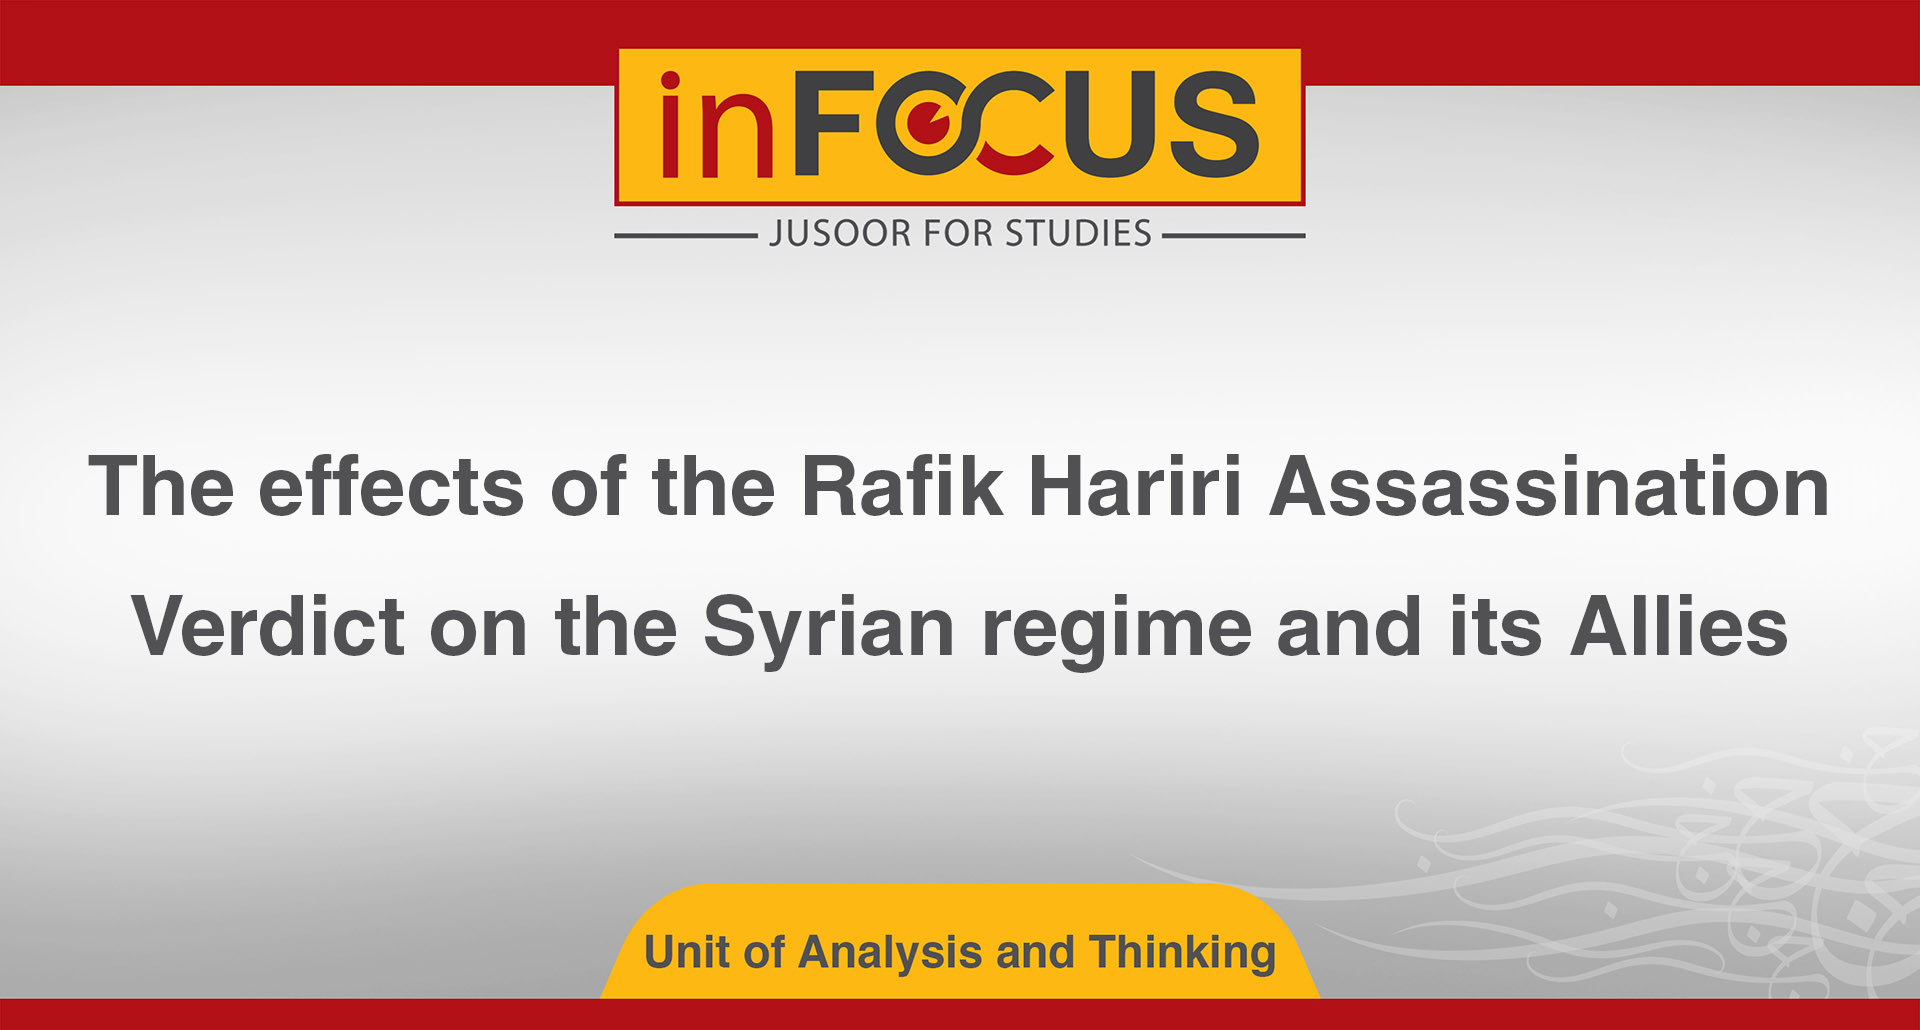 The effects of the Rafik Hariri Assassination Verdict on the Syrian regime and its Allies